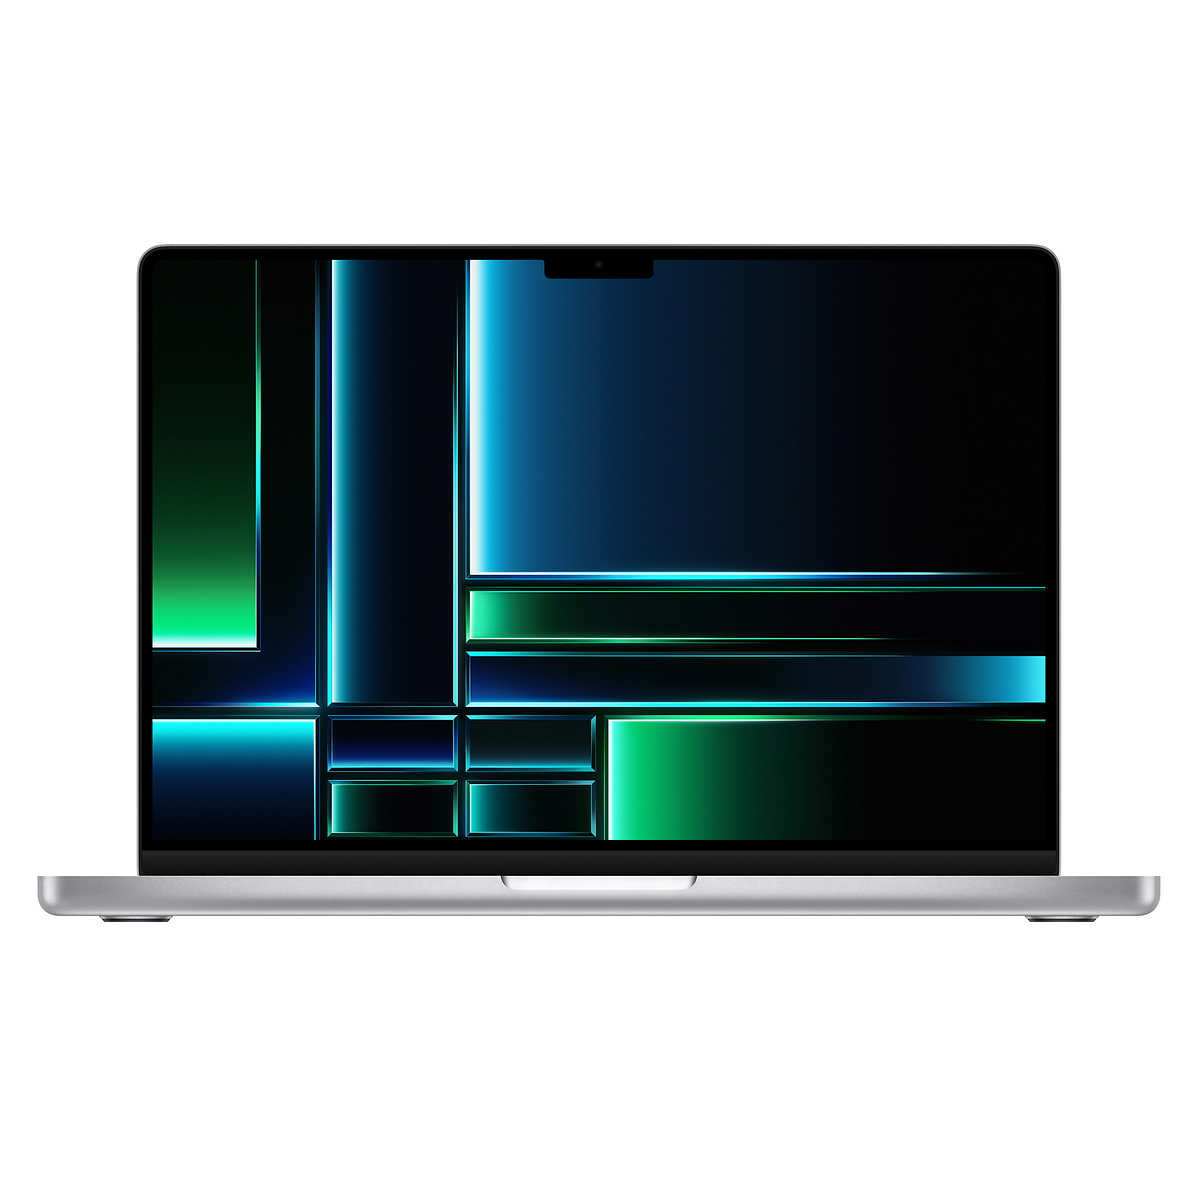 MacBook Pro (14-inch) - Apple M2 Pro Chip with 10-Core CPU and 16-Core GPU, 16GB RAM, 512GB SSD (2023) + [AppleCare+ for $219.99] -- $1599.99 at Costco